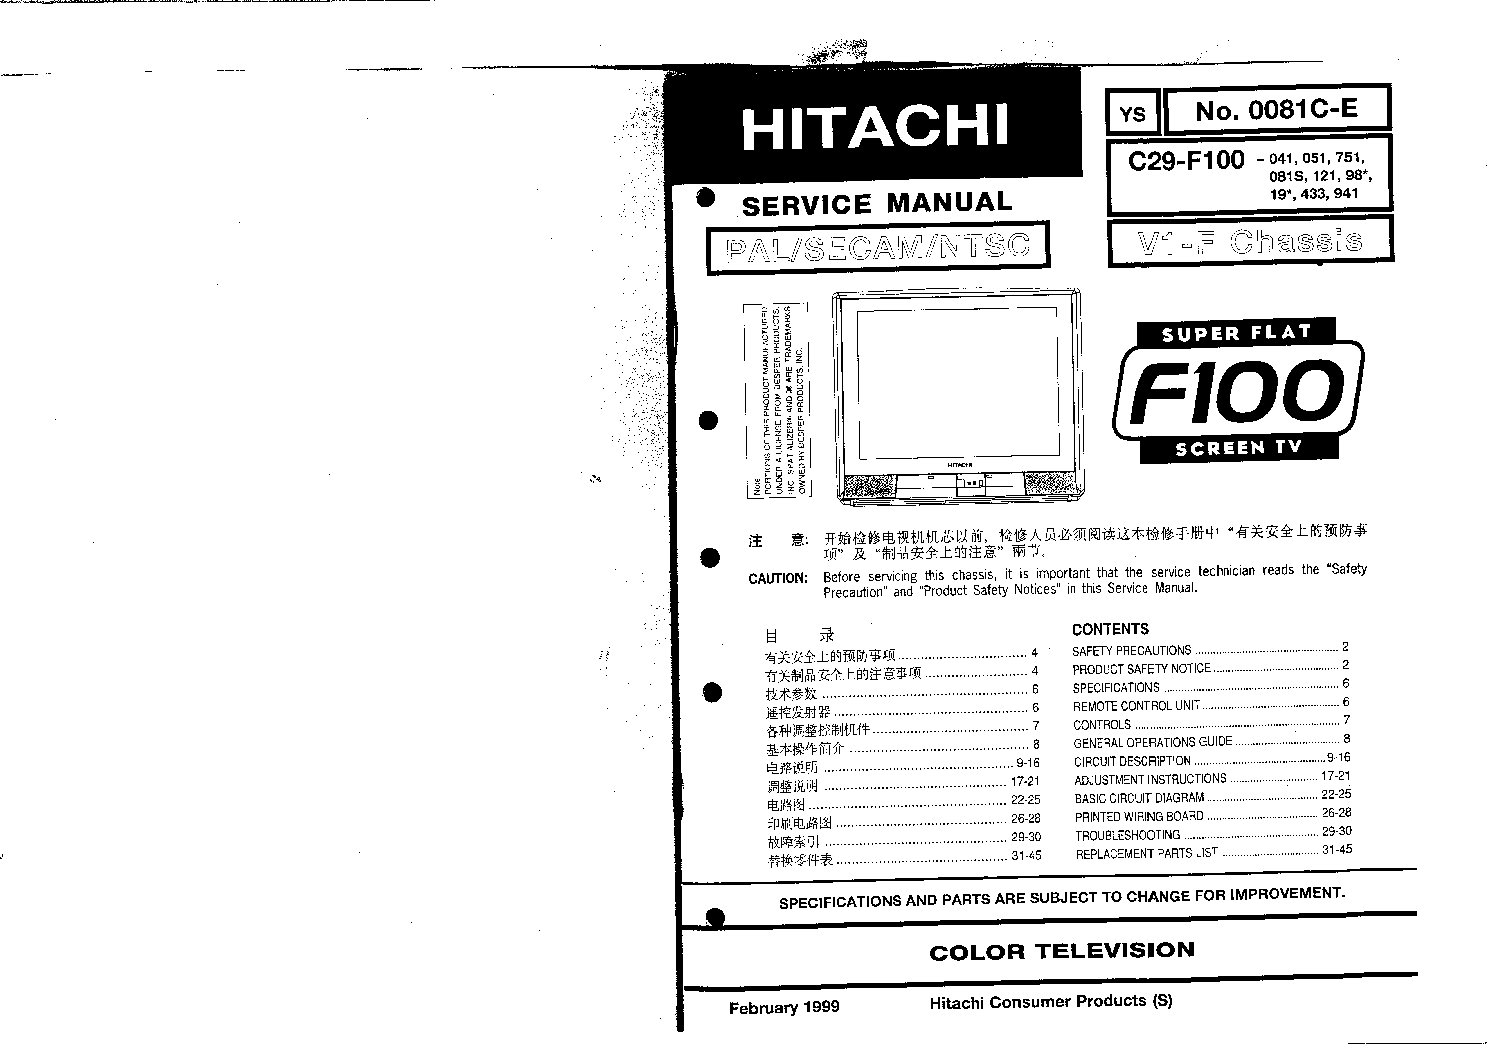 HITACHI CHASSIS V1-F C29F100 service manual (1st page)